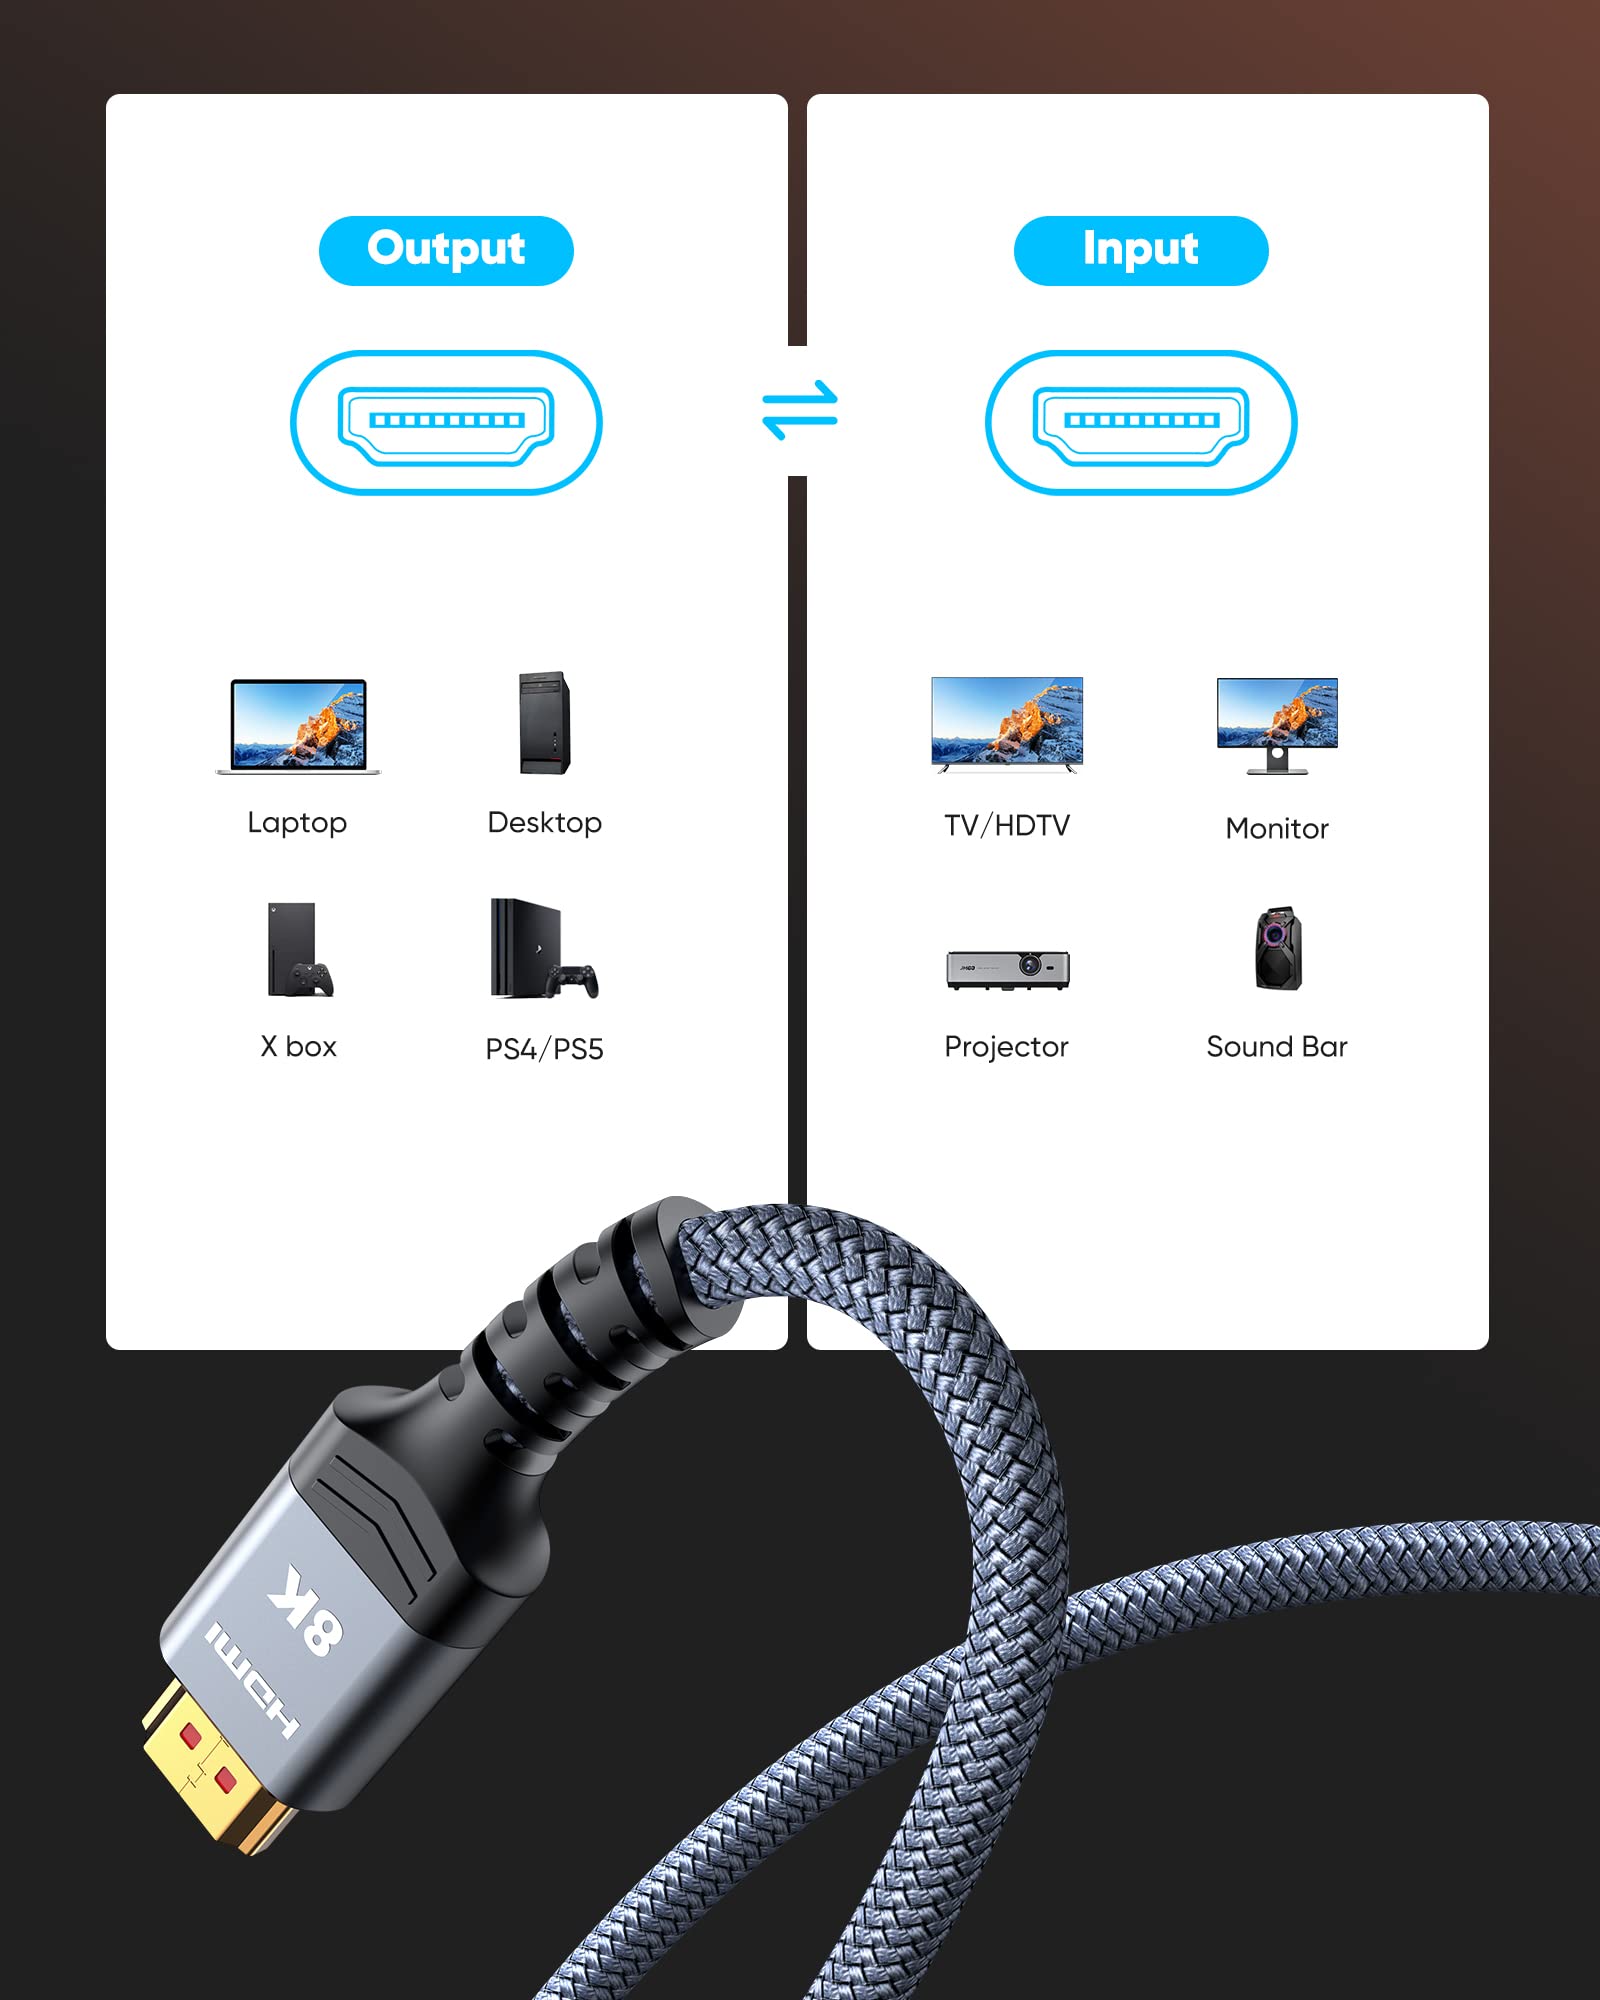 Highwings 8K 10K HDMI 2.1 Cable 48Gbps 6.6FT/2M, Certified High Speed HDMI Braided Cord-4K@120Hz 8K@60Hz, DTS:X, HDCP 2.2 & 2.3, HDR 10 Compatible with Roku TV/PS5/HDTV/Blu-ray